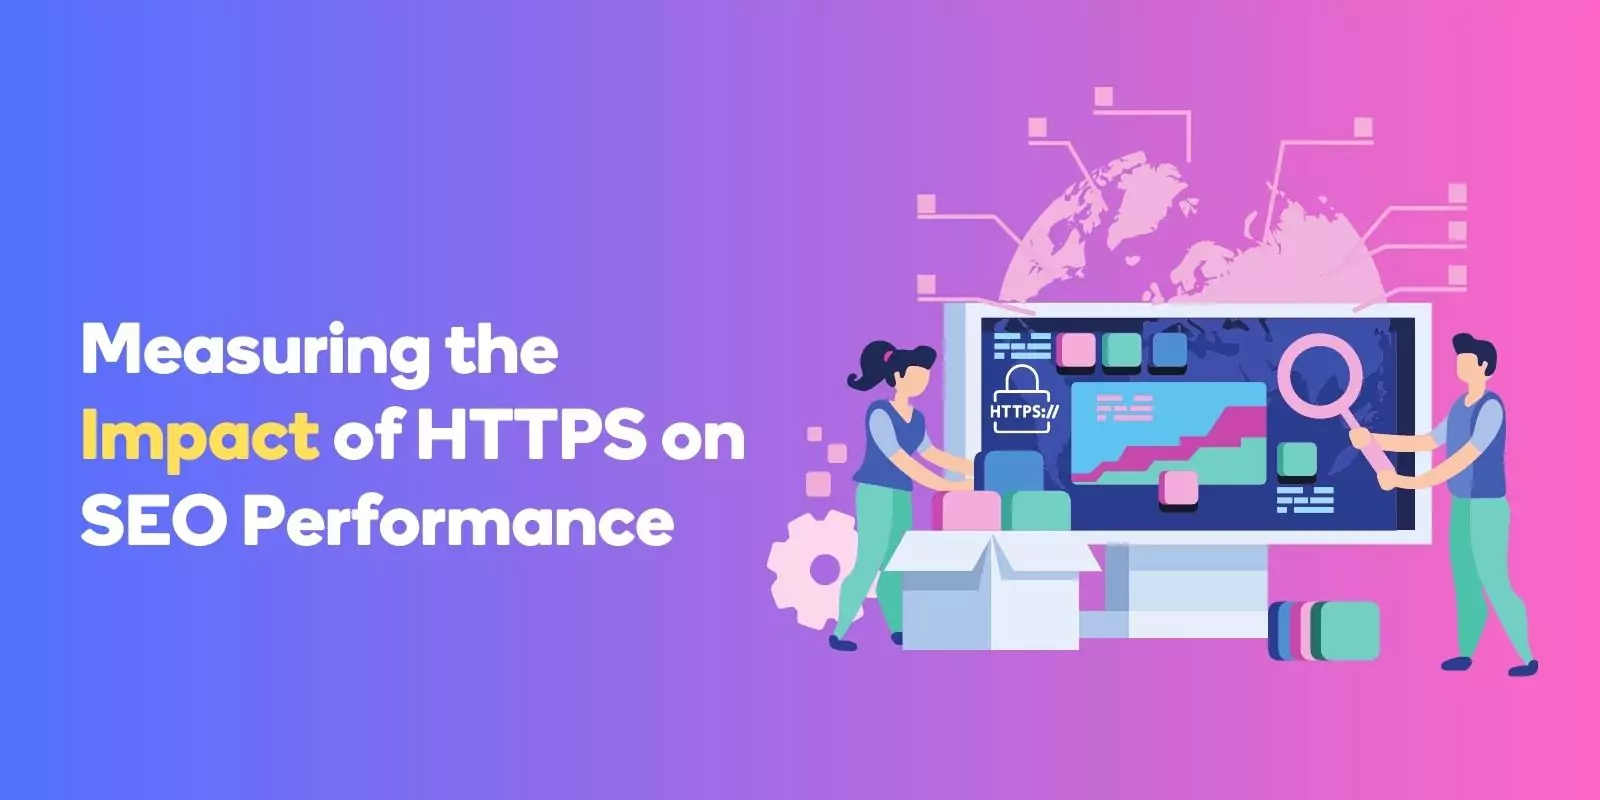 Measuring the Impact of HTTPS on SEO Performance